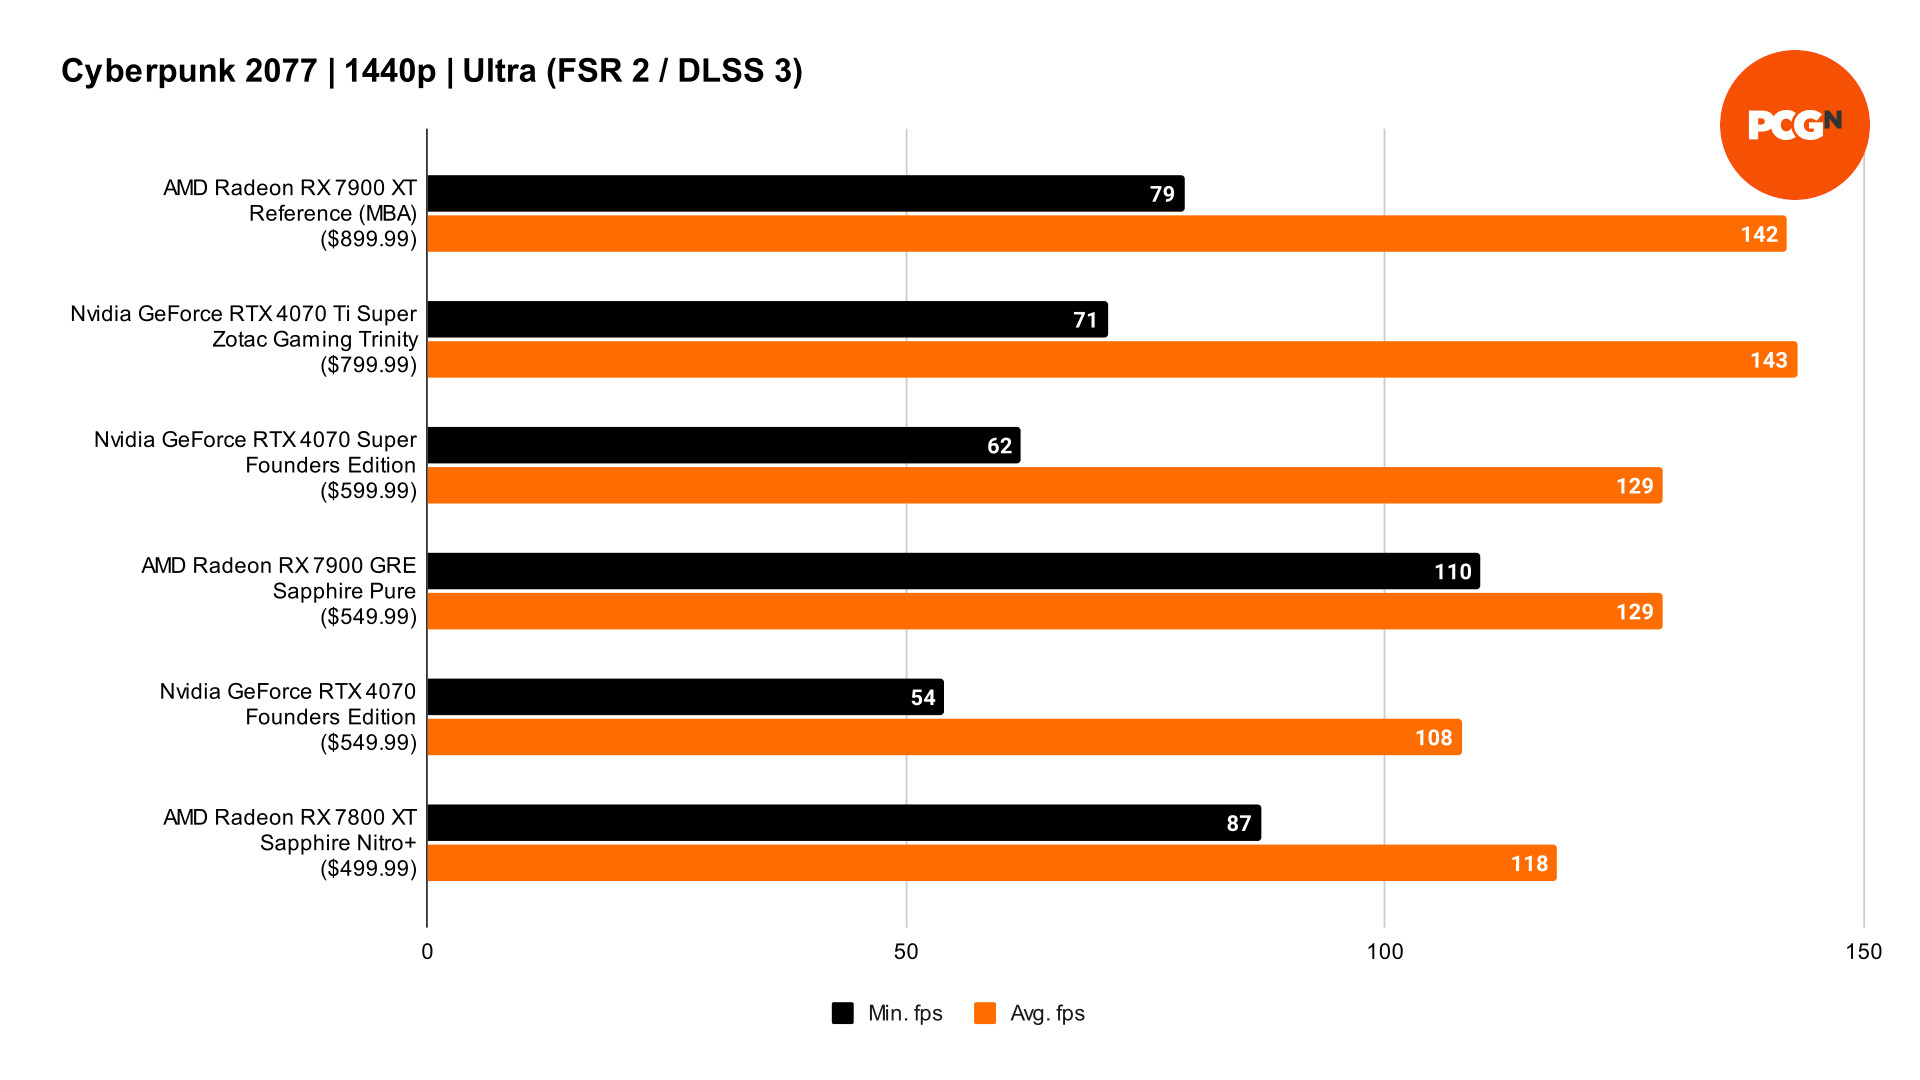 AMD Radeon RX 7900 GRE review: Cyberpunk 2077 rasterization with FSR 2 benchmark results graph